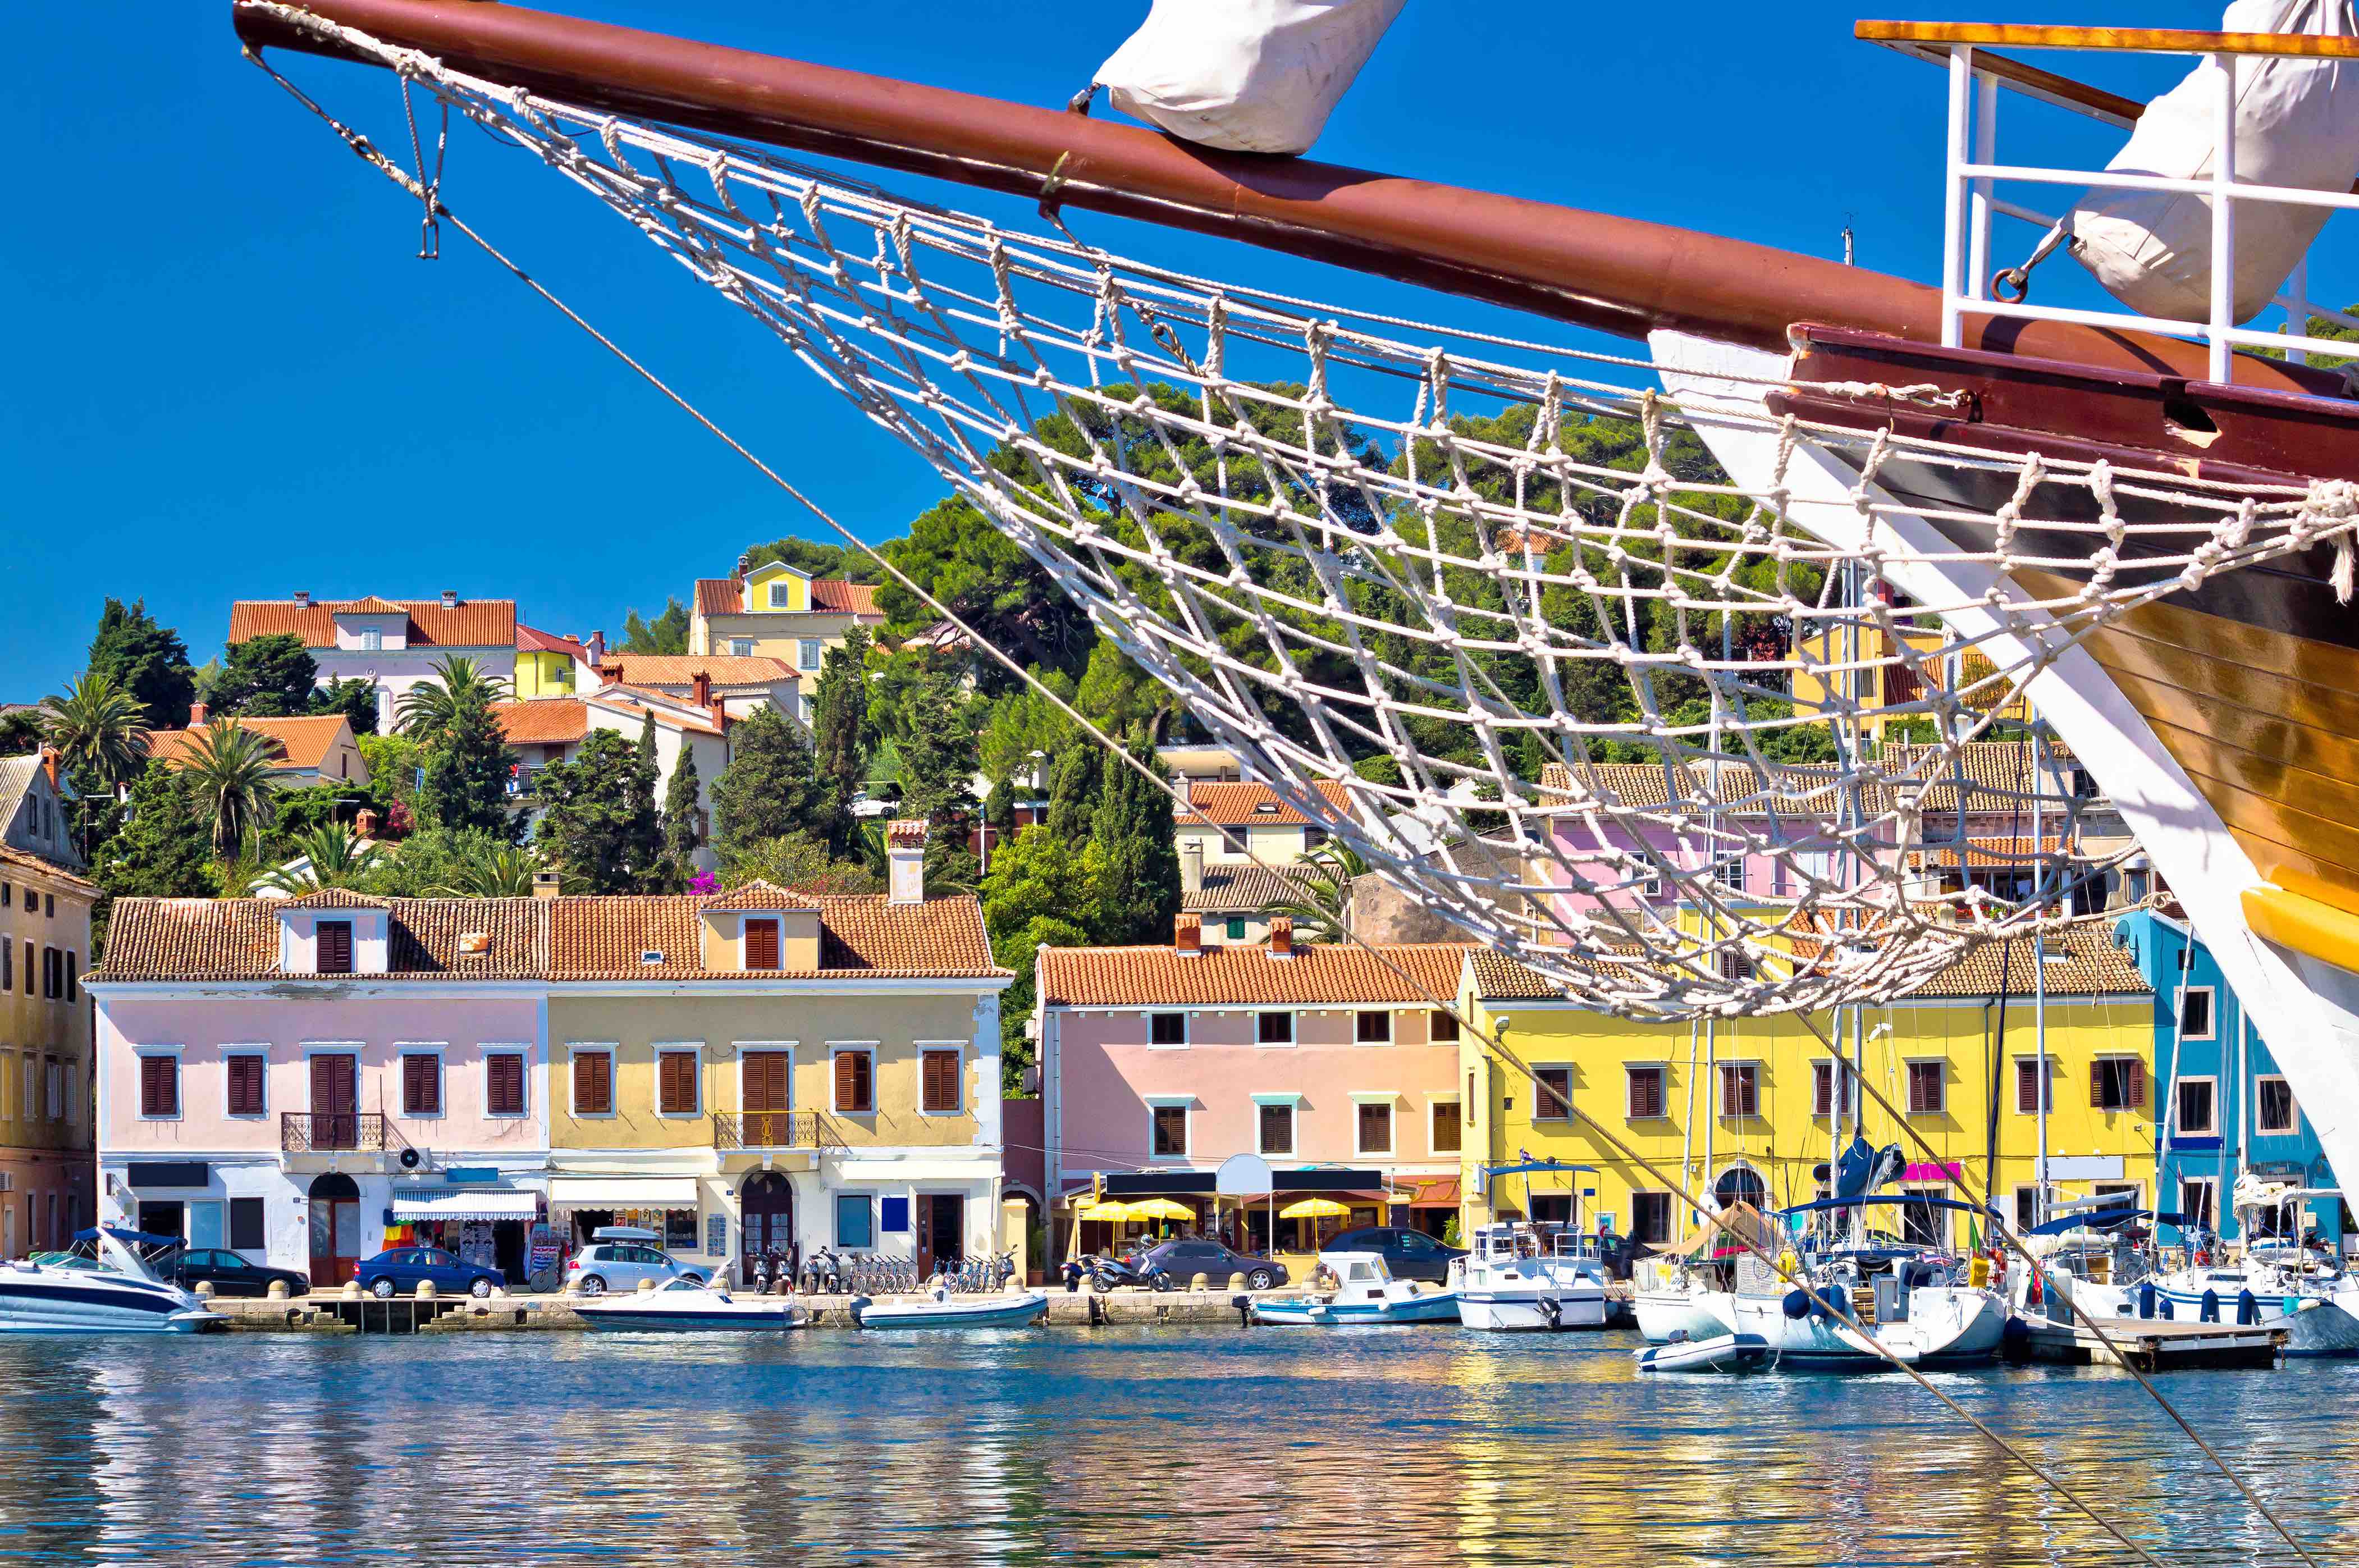 In Croatia on the island of lošinj prices have risen by 5%